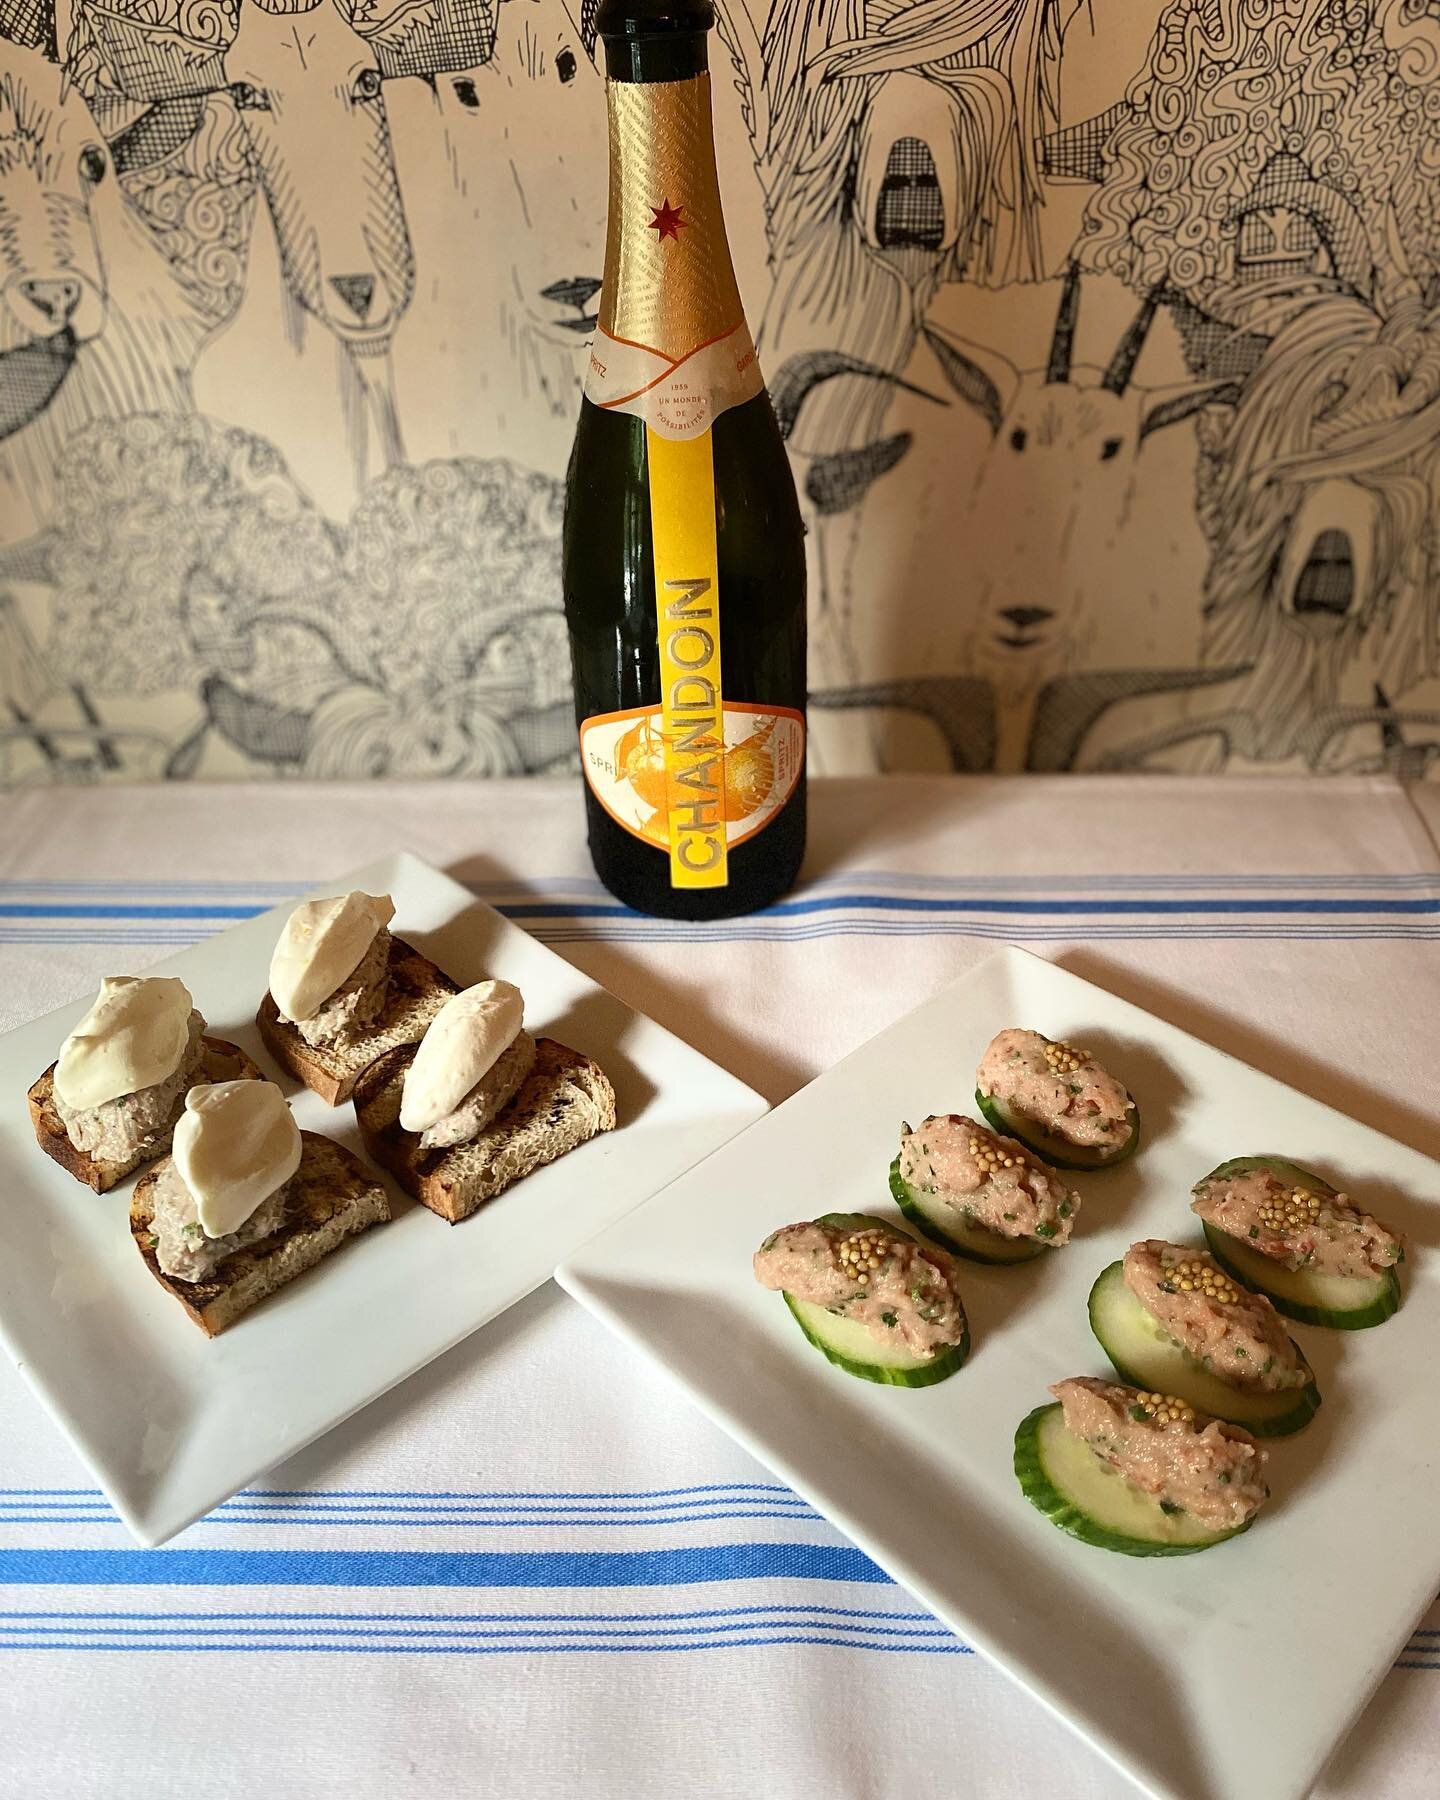 Our Reception begins with passed hor d&rsquo; oeuvres of Tuna &amp; Tomato Tartar on Cucumber slice and Duck Rillettes with Orange Creme Fraiche on Grilled Bread paired with Chandon Garden Spritz, Napa Valley, CA, NV #thefrenchgoat #lewisburgwv #bona